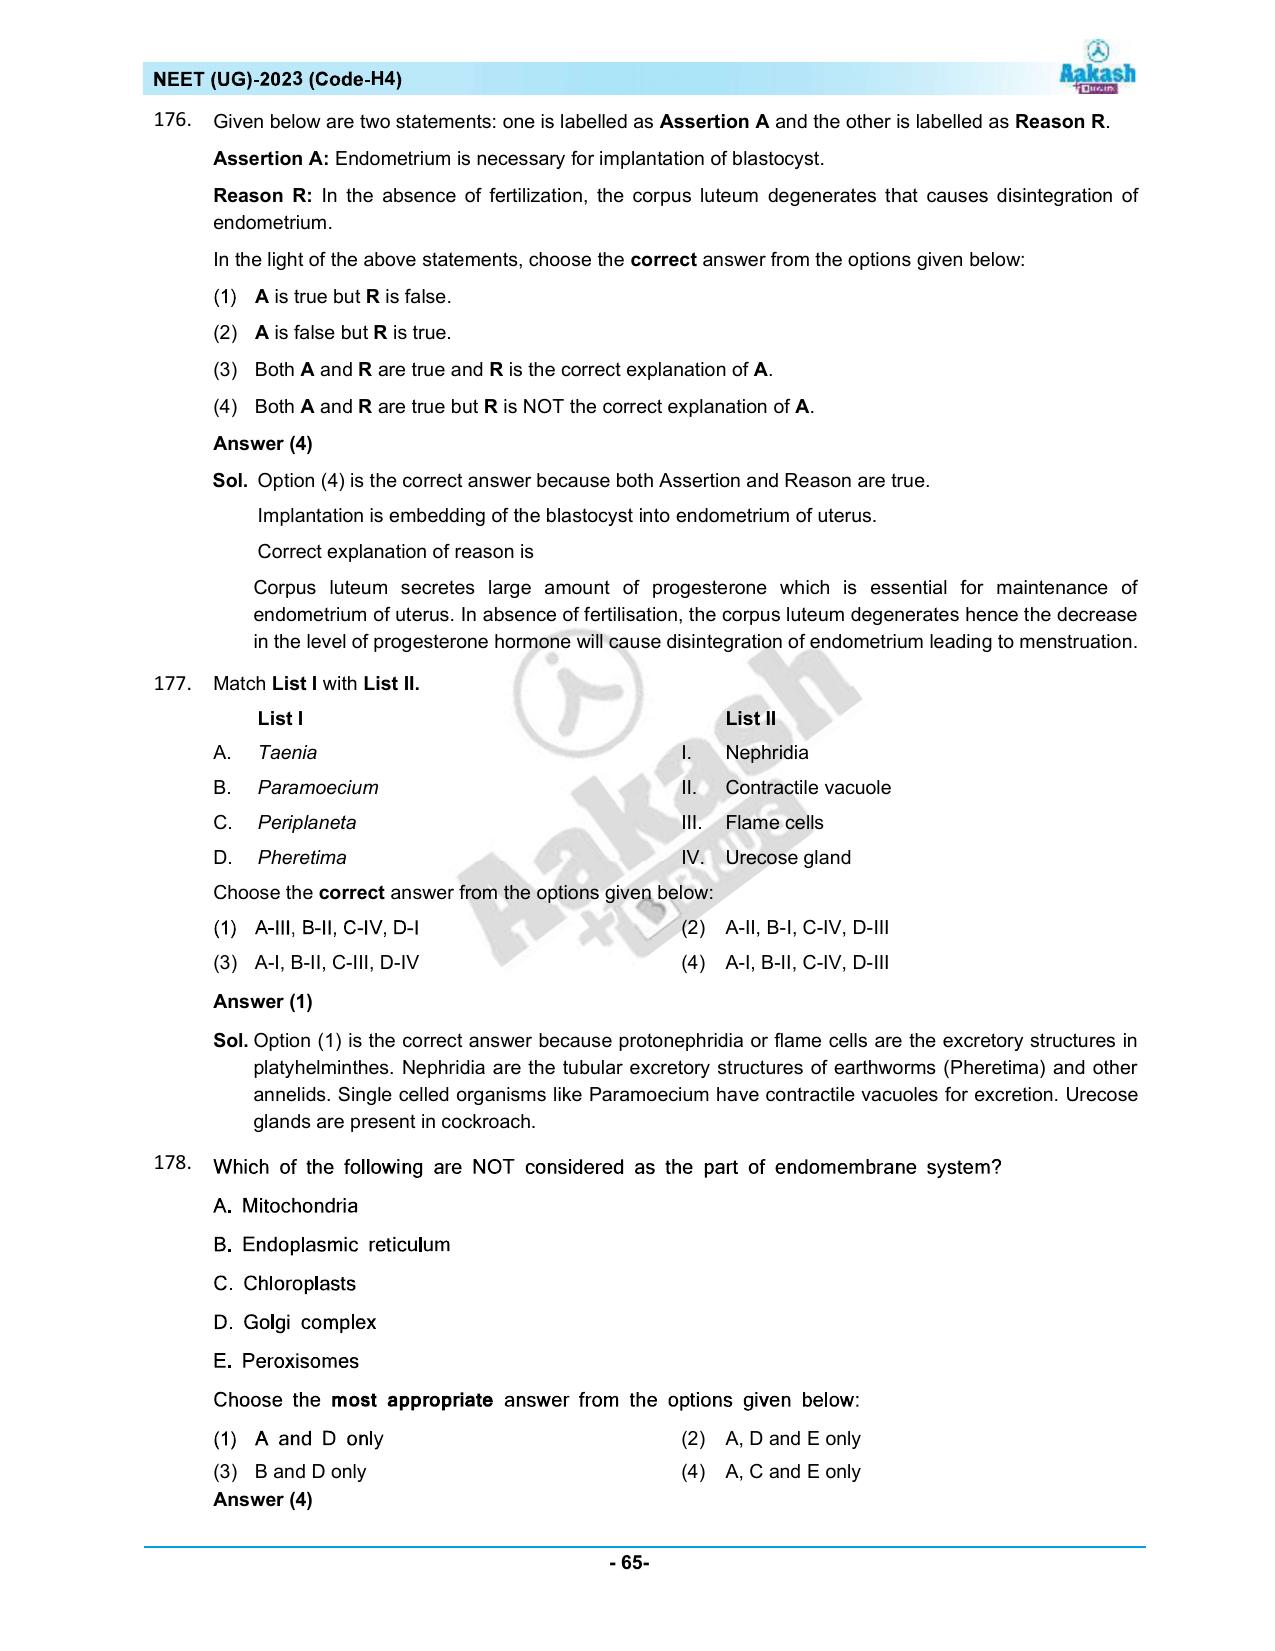 NEET 2023 Question Paper H4 - Page 65